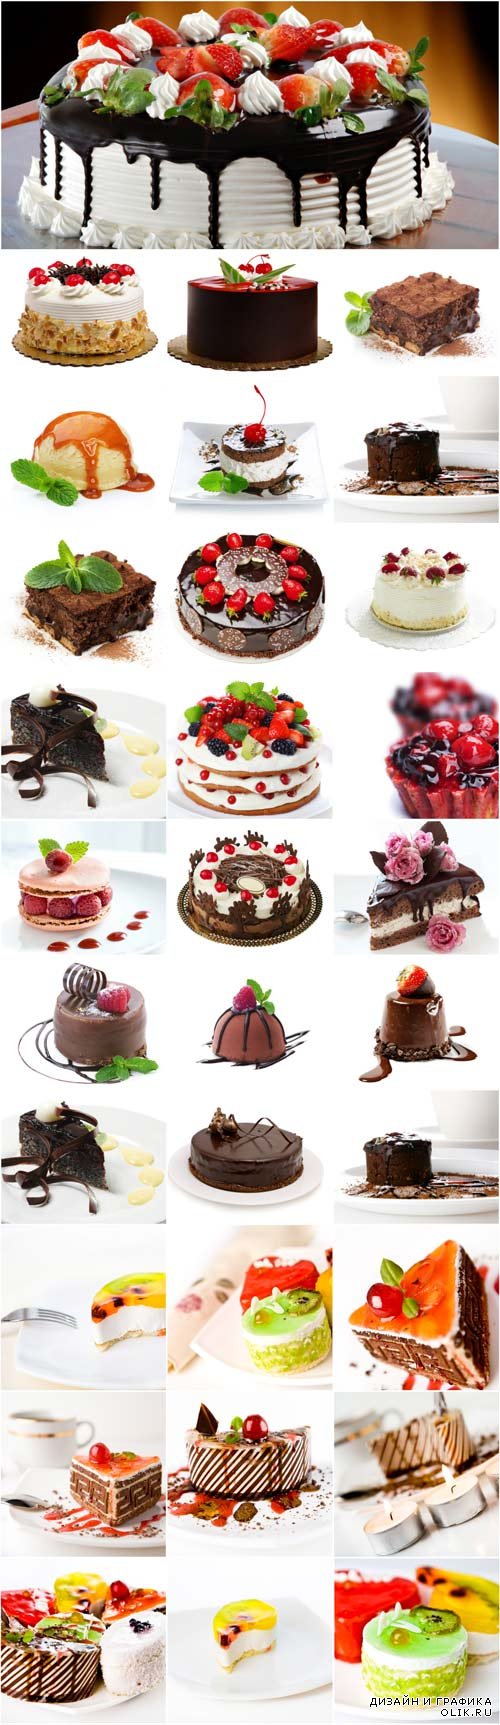 Sweet dessert - cakes and pies